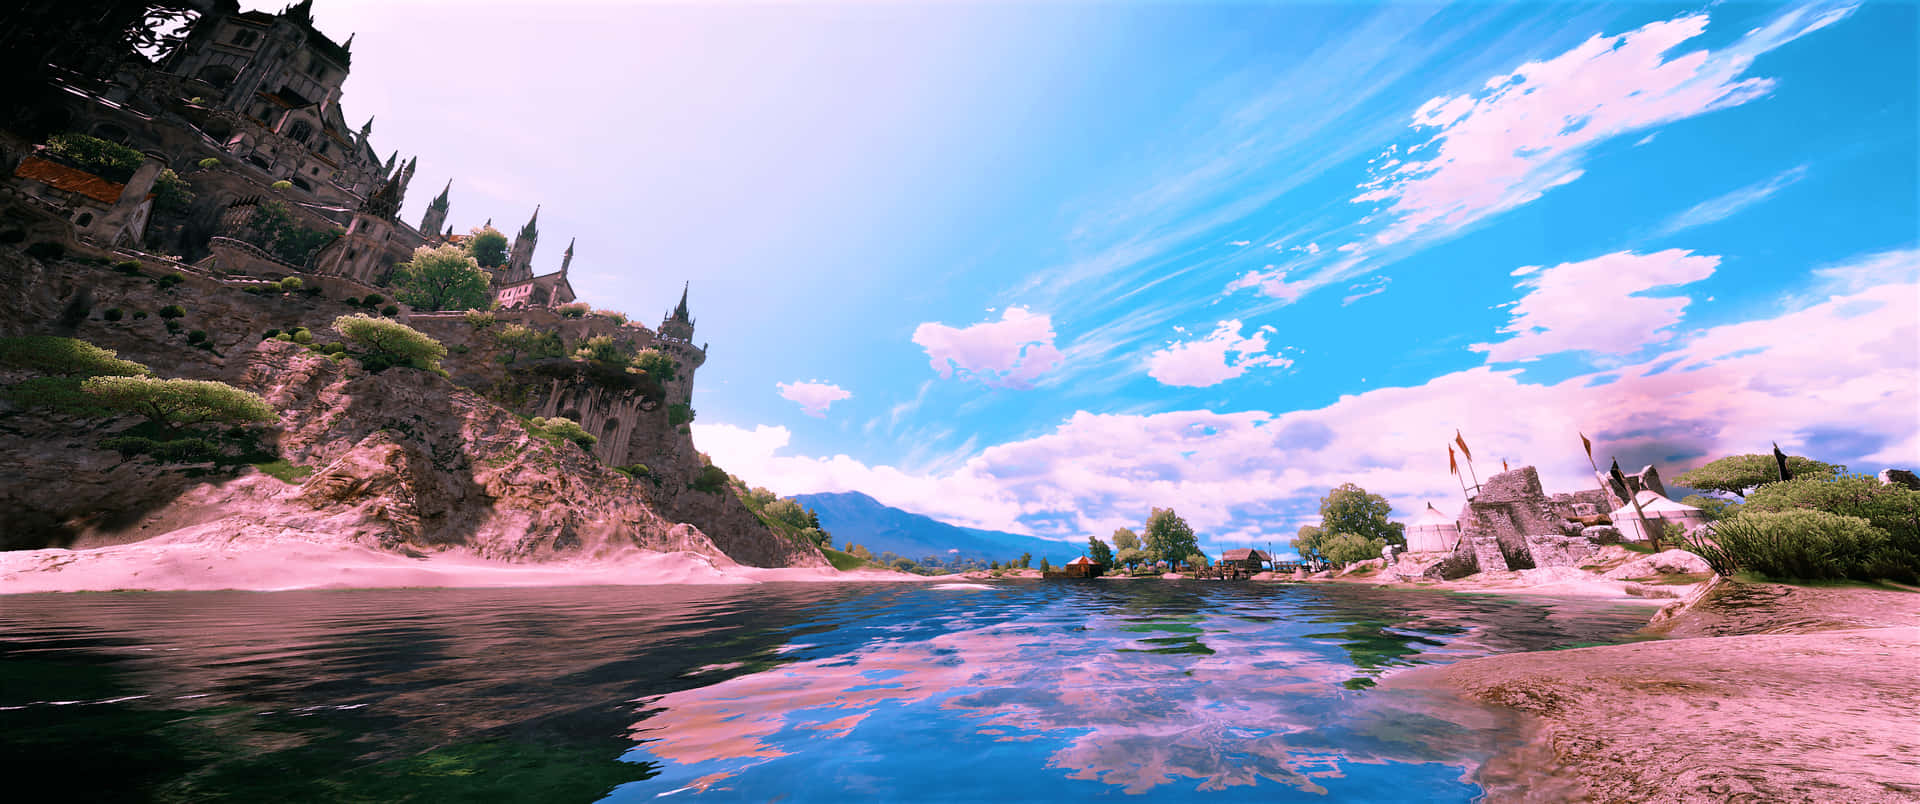 A Watery Scene With A Castle And Mountains Wallpaper